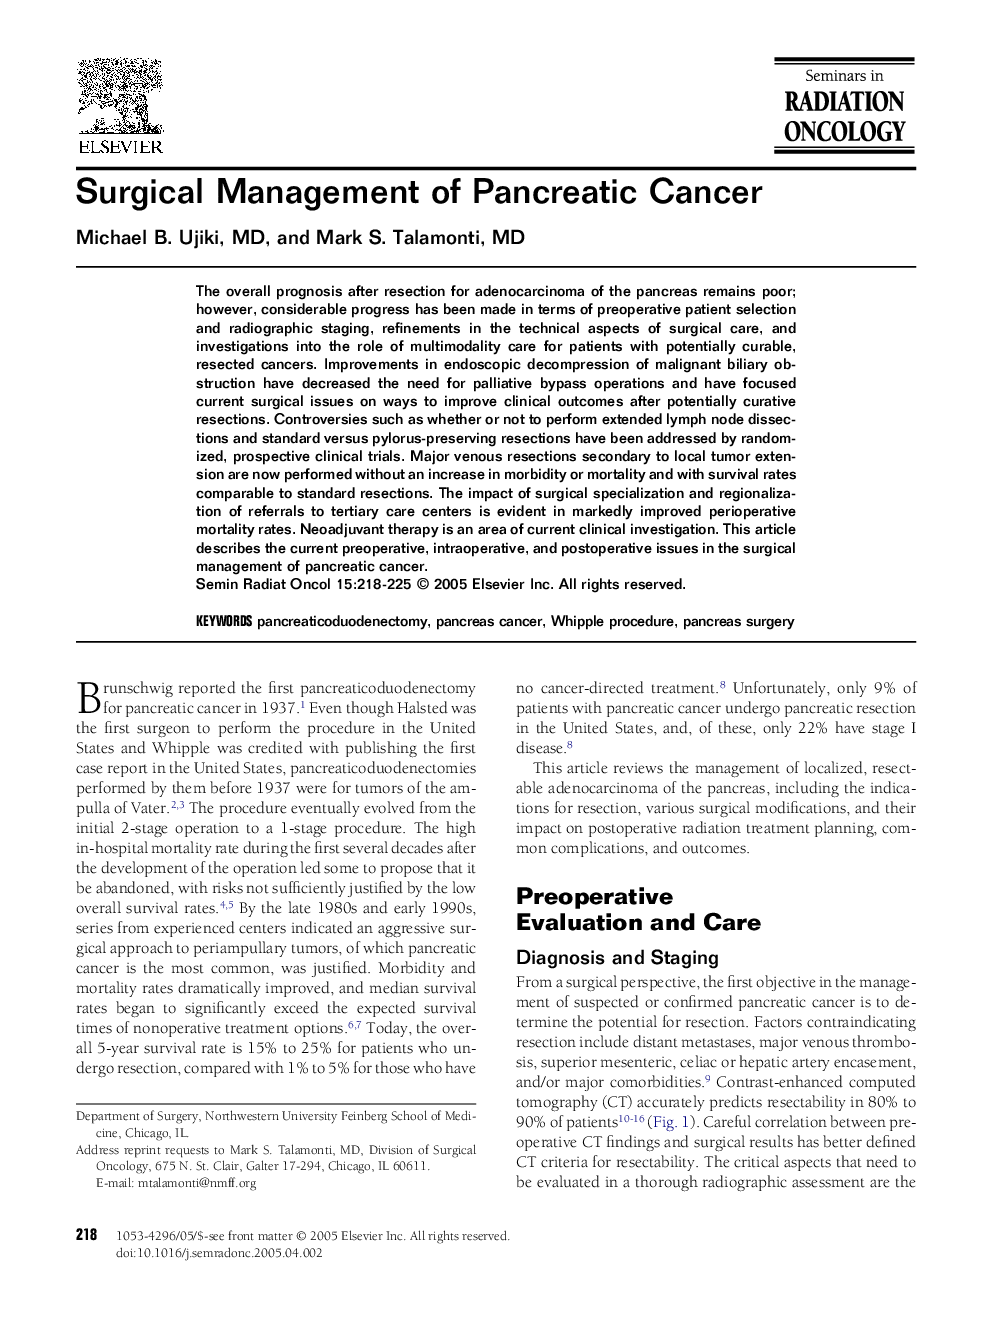 Surgical Management of Pancreatic Cancer